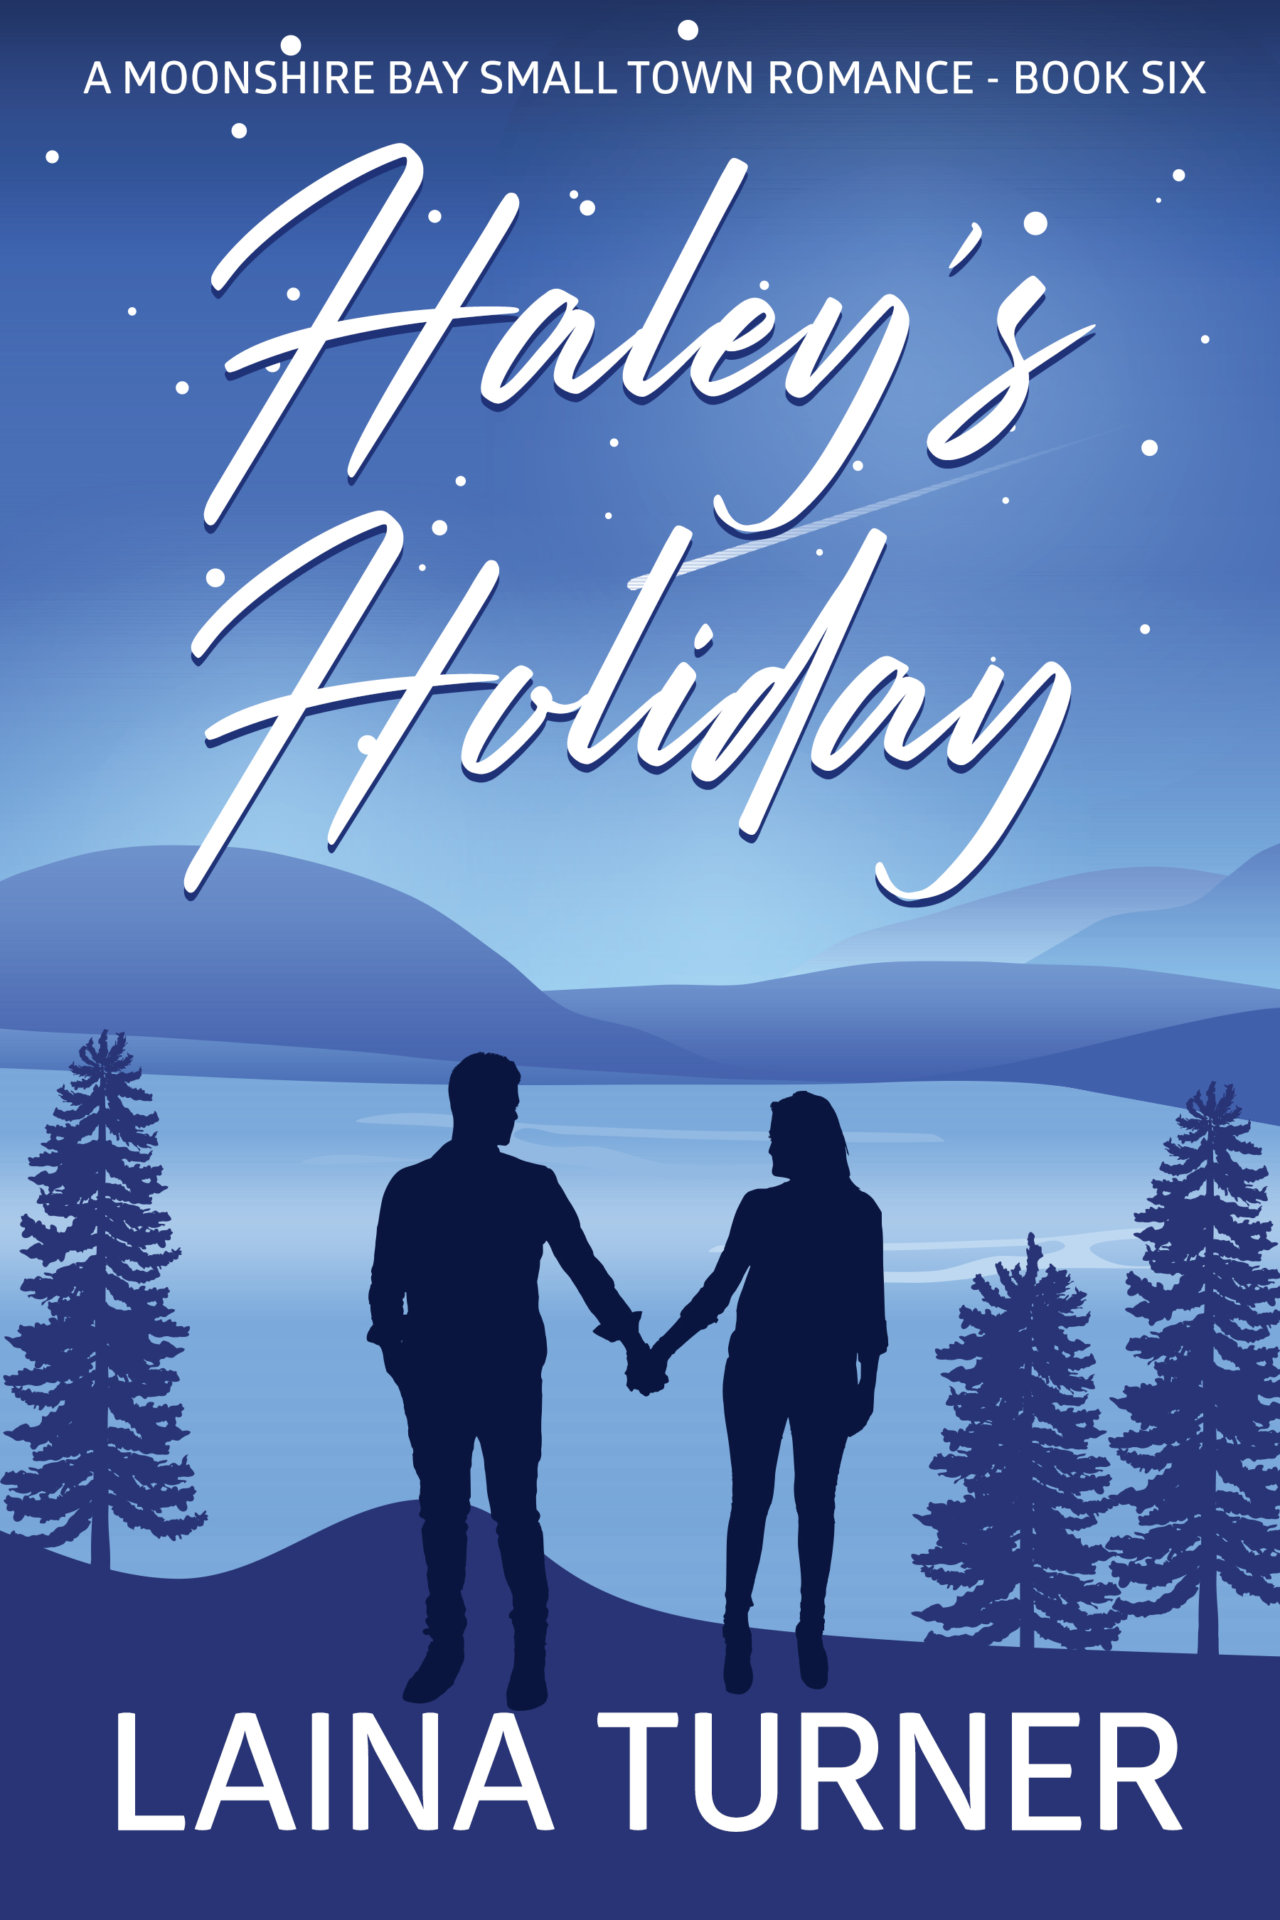 Haley’s Holiday – A Moonshire Bay Small Town Romance Book 6